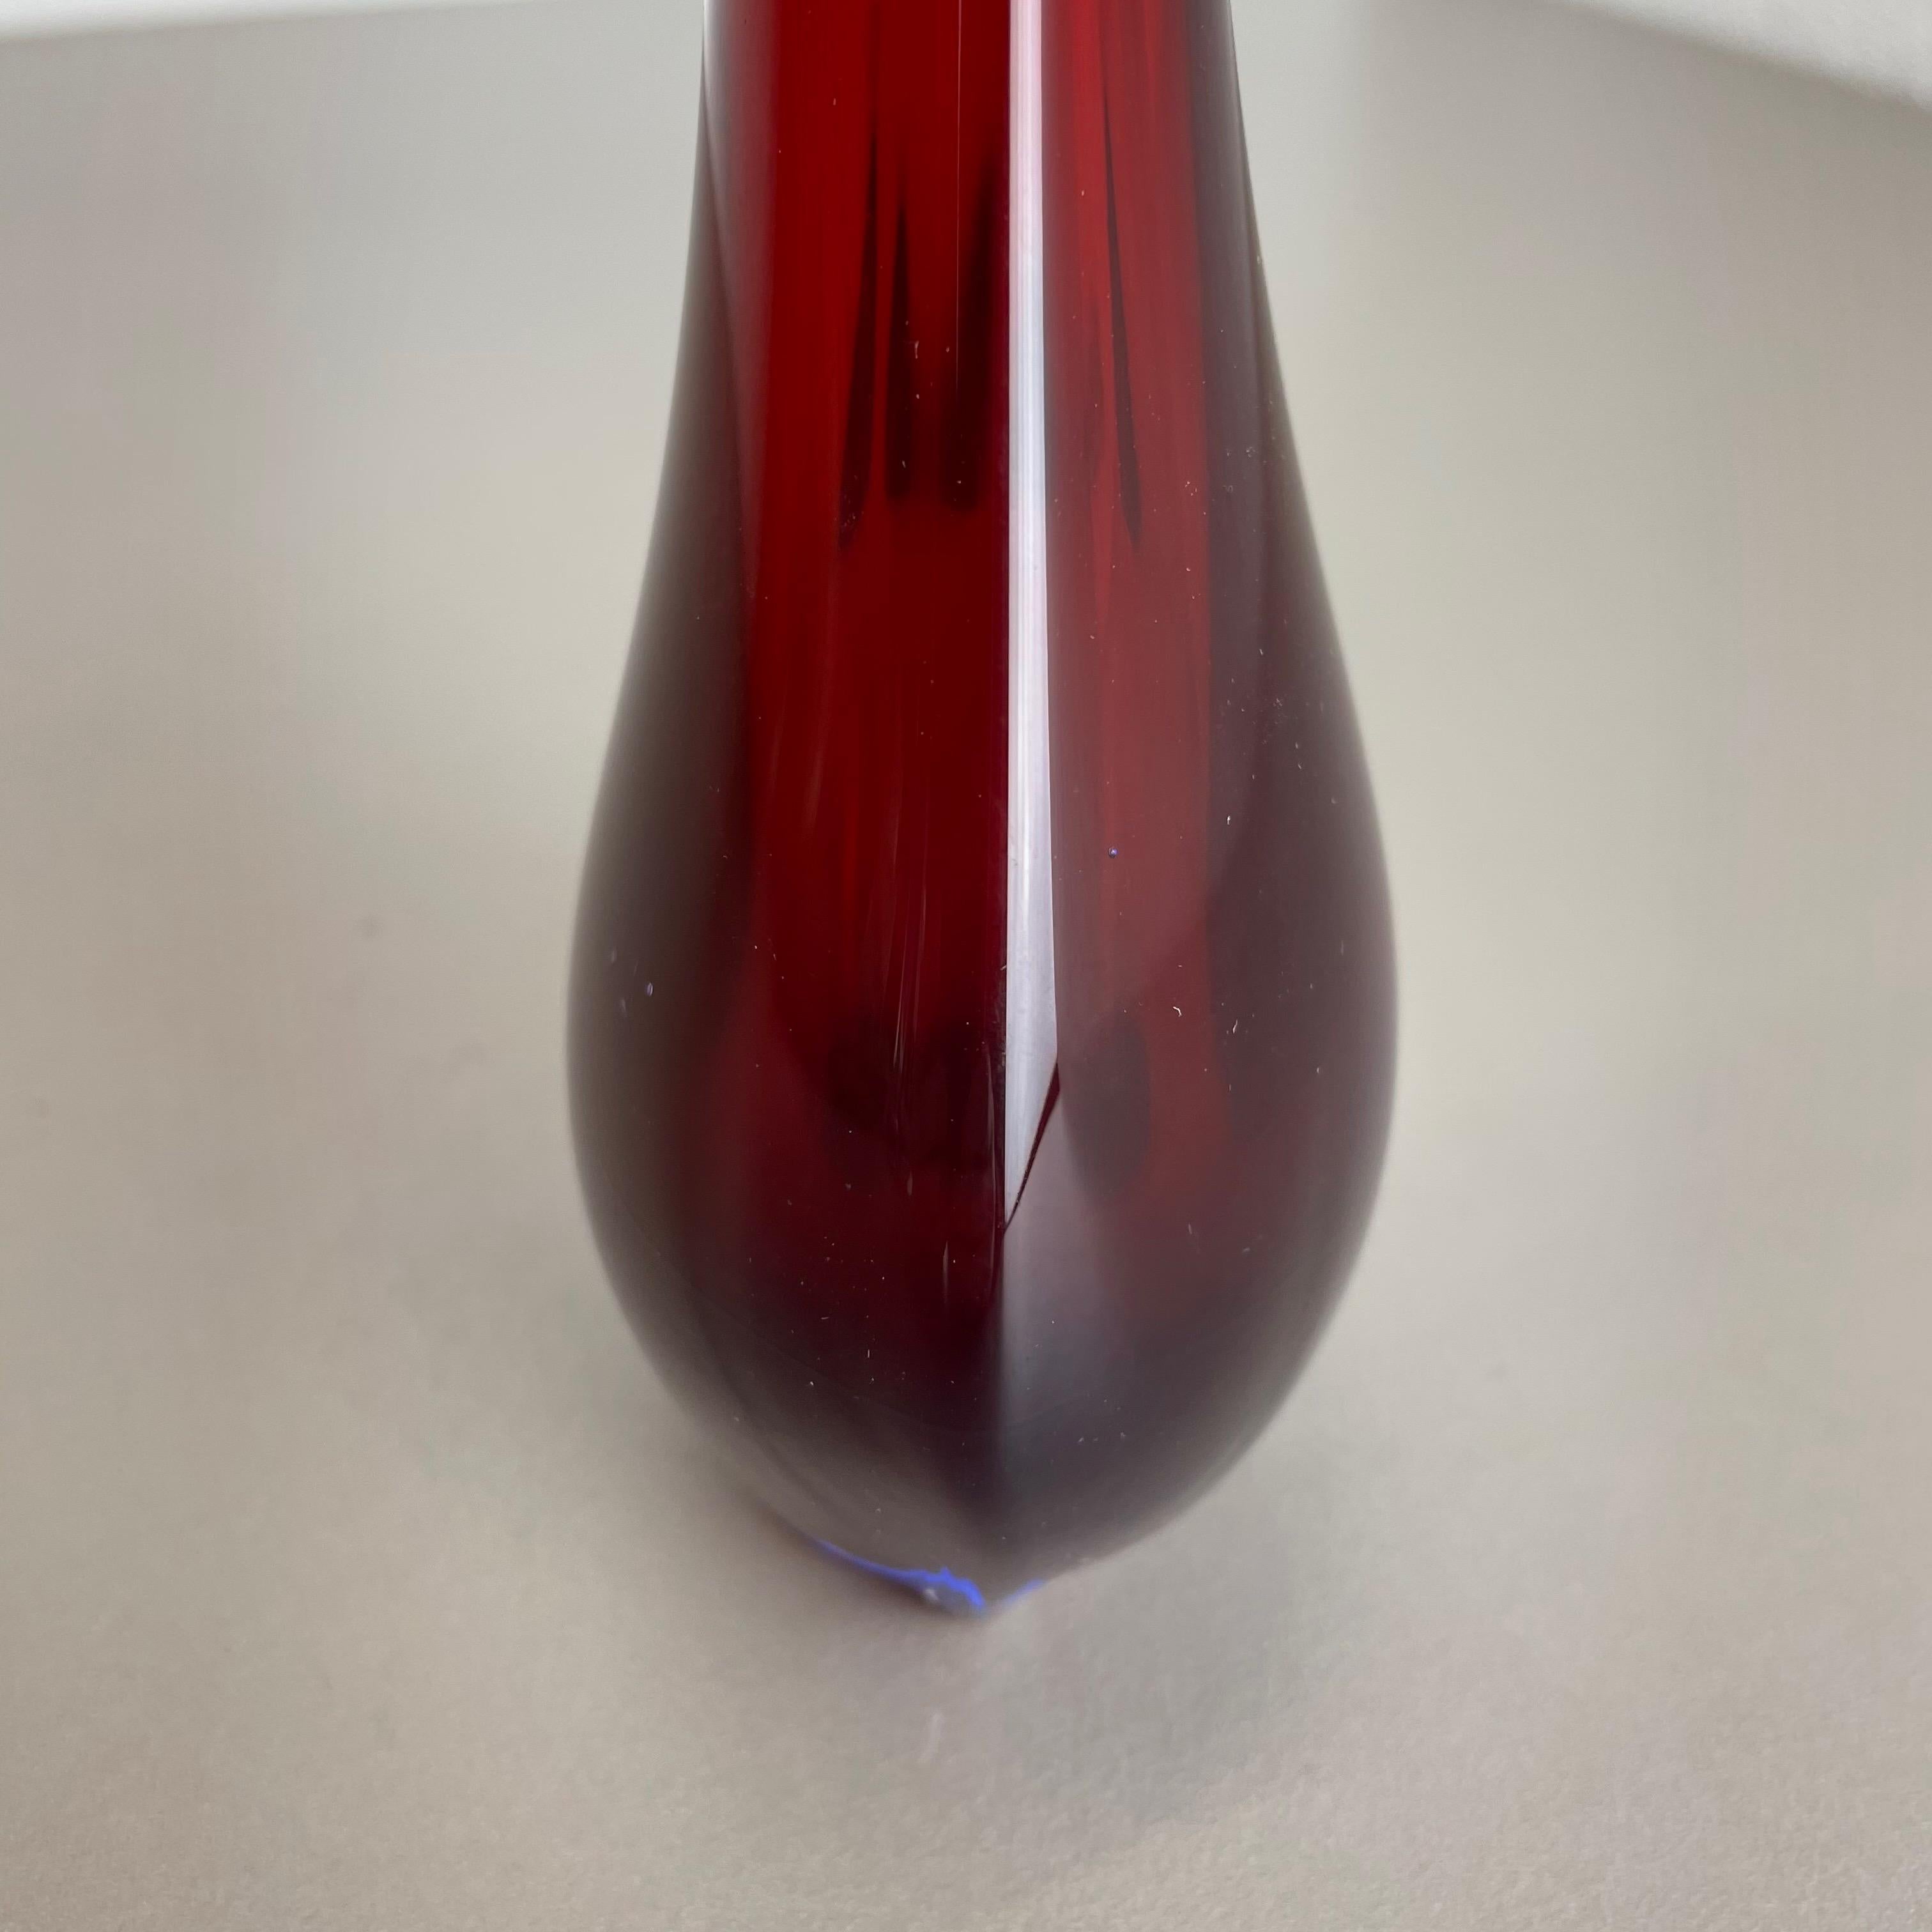 Large 1960s Murano Glass Sommerso 29cm Single-Stem Vase by Flavio Poli, Italy For Sale 5